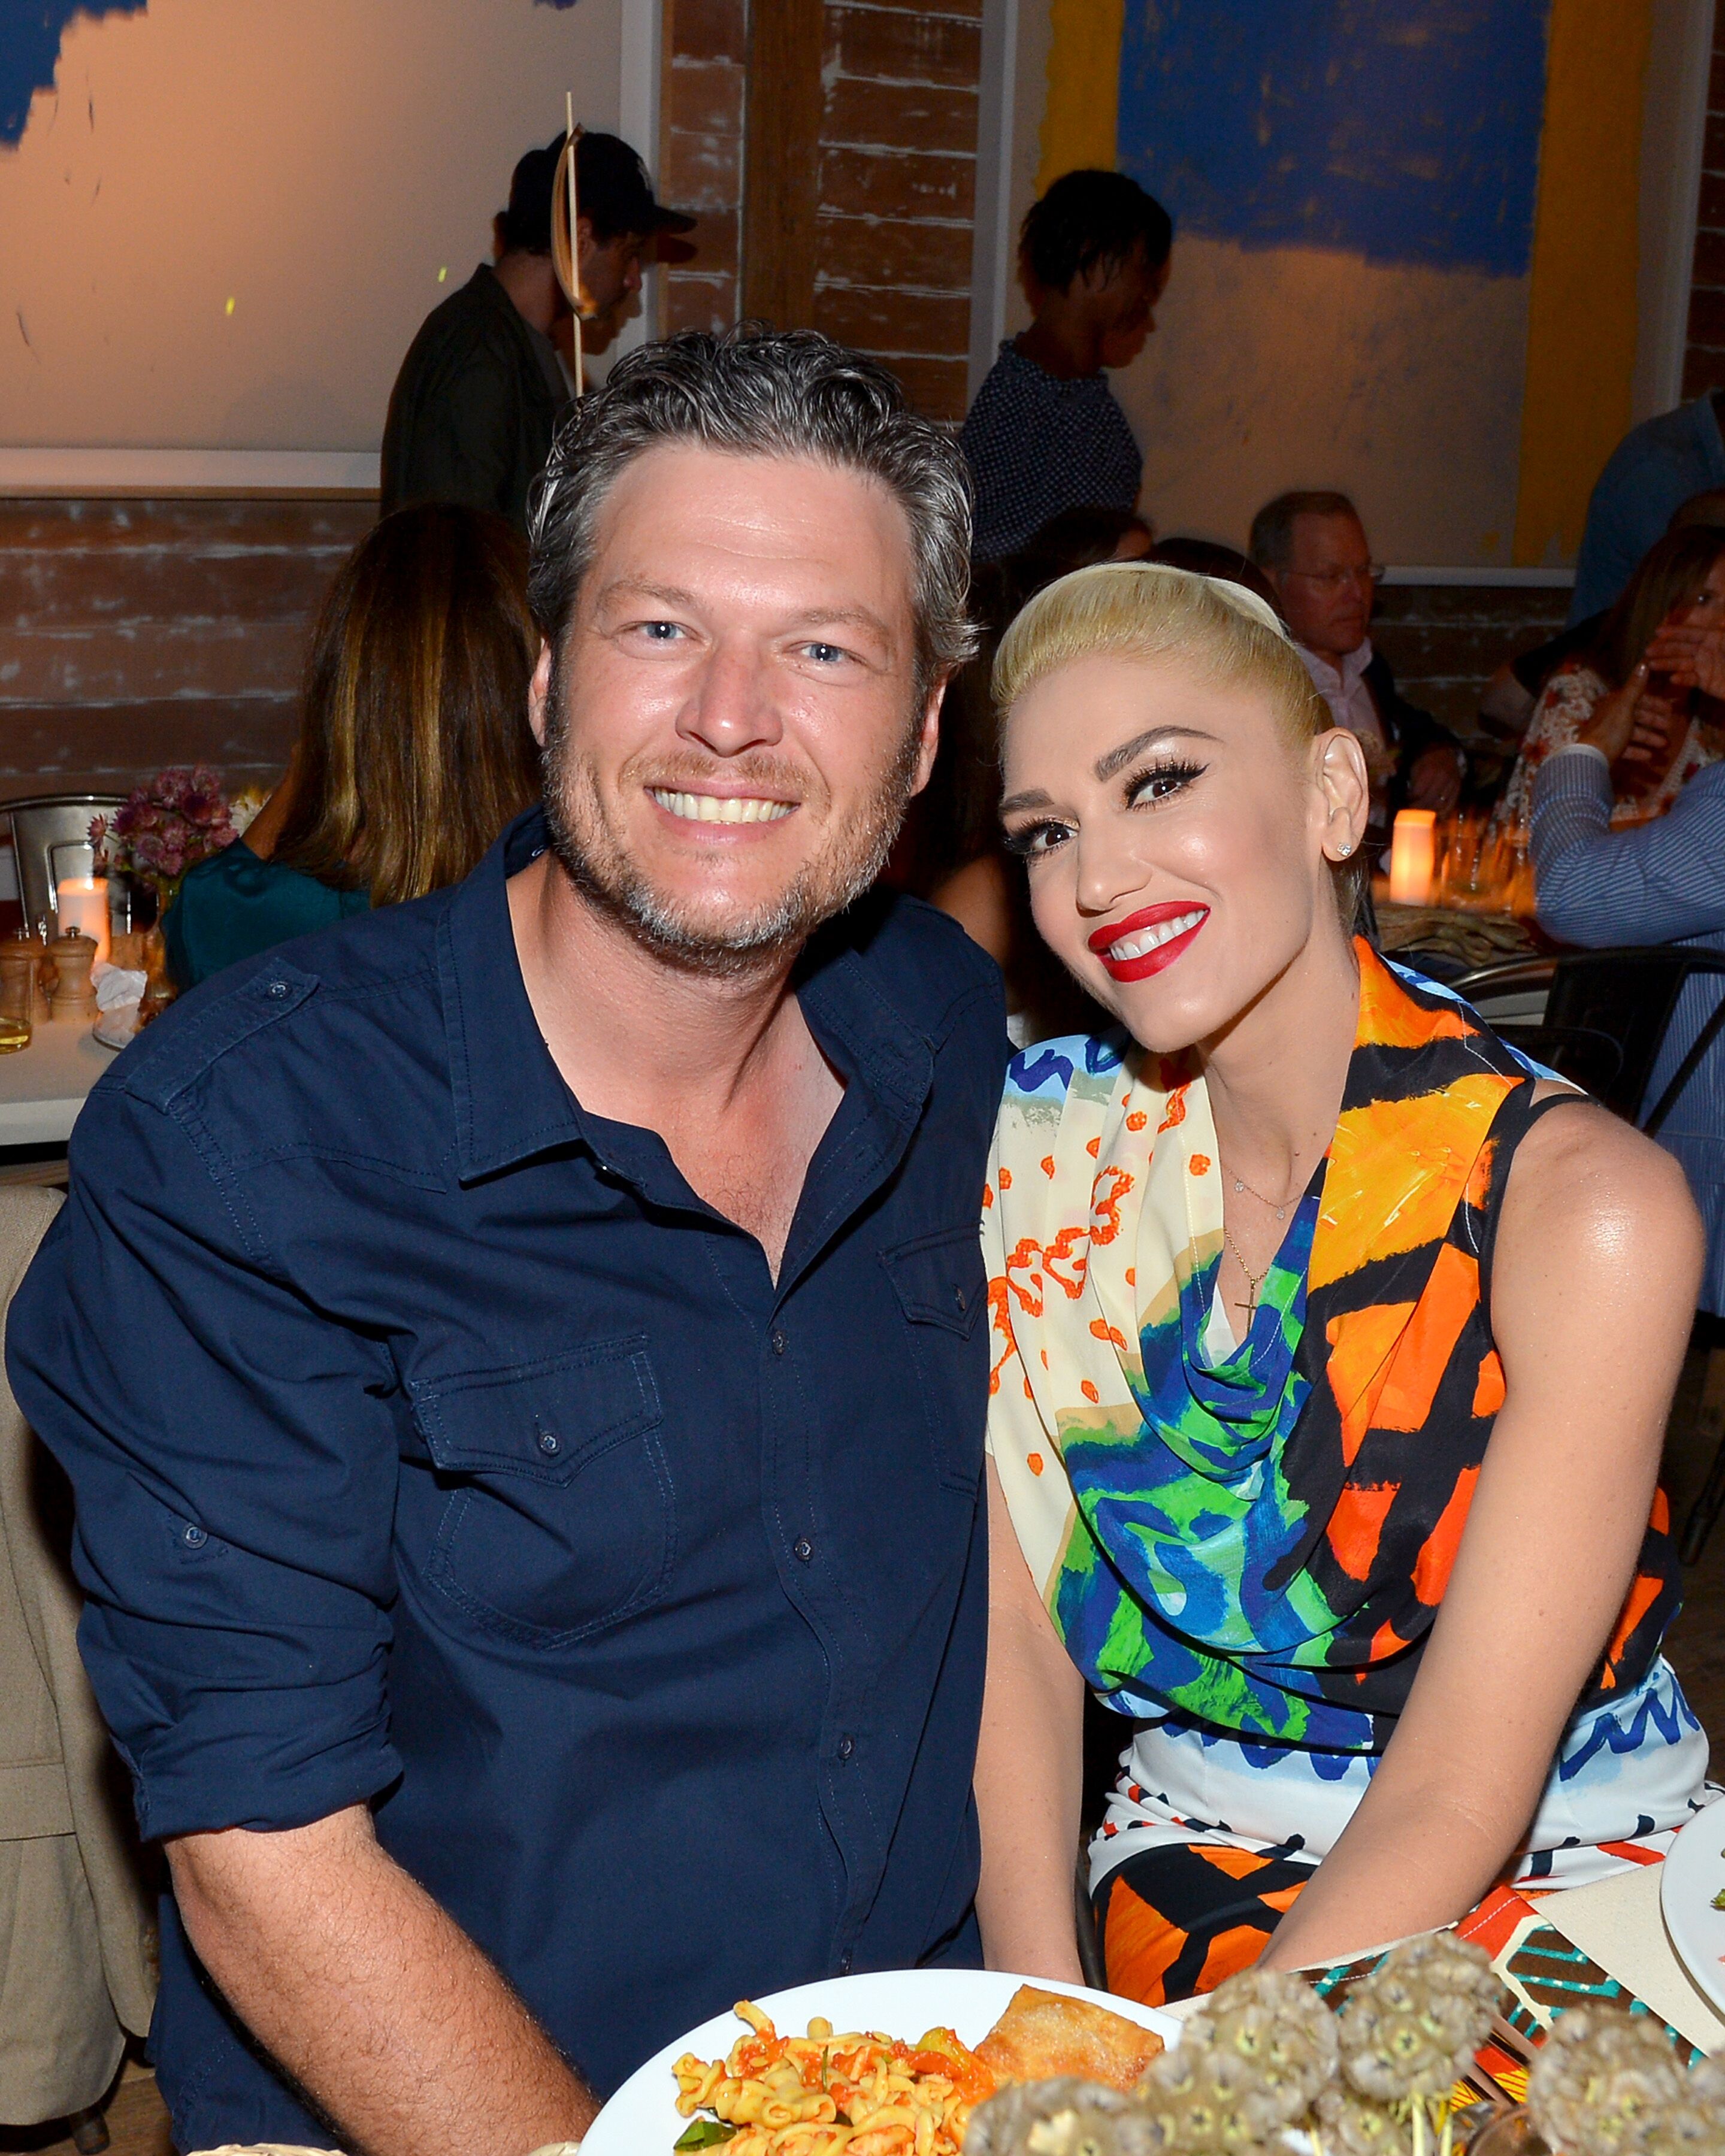 Blake Shelton and Gwen Stefani at the Apollo in the Hamptons party on August 20, 2016, in East Hampton, New York | Photo: Patrick McMullan/Getty Images